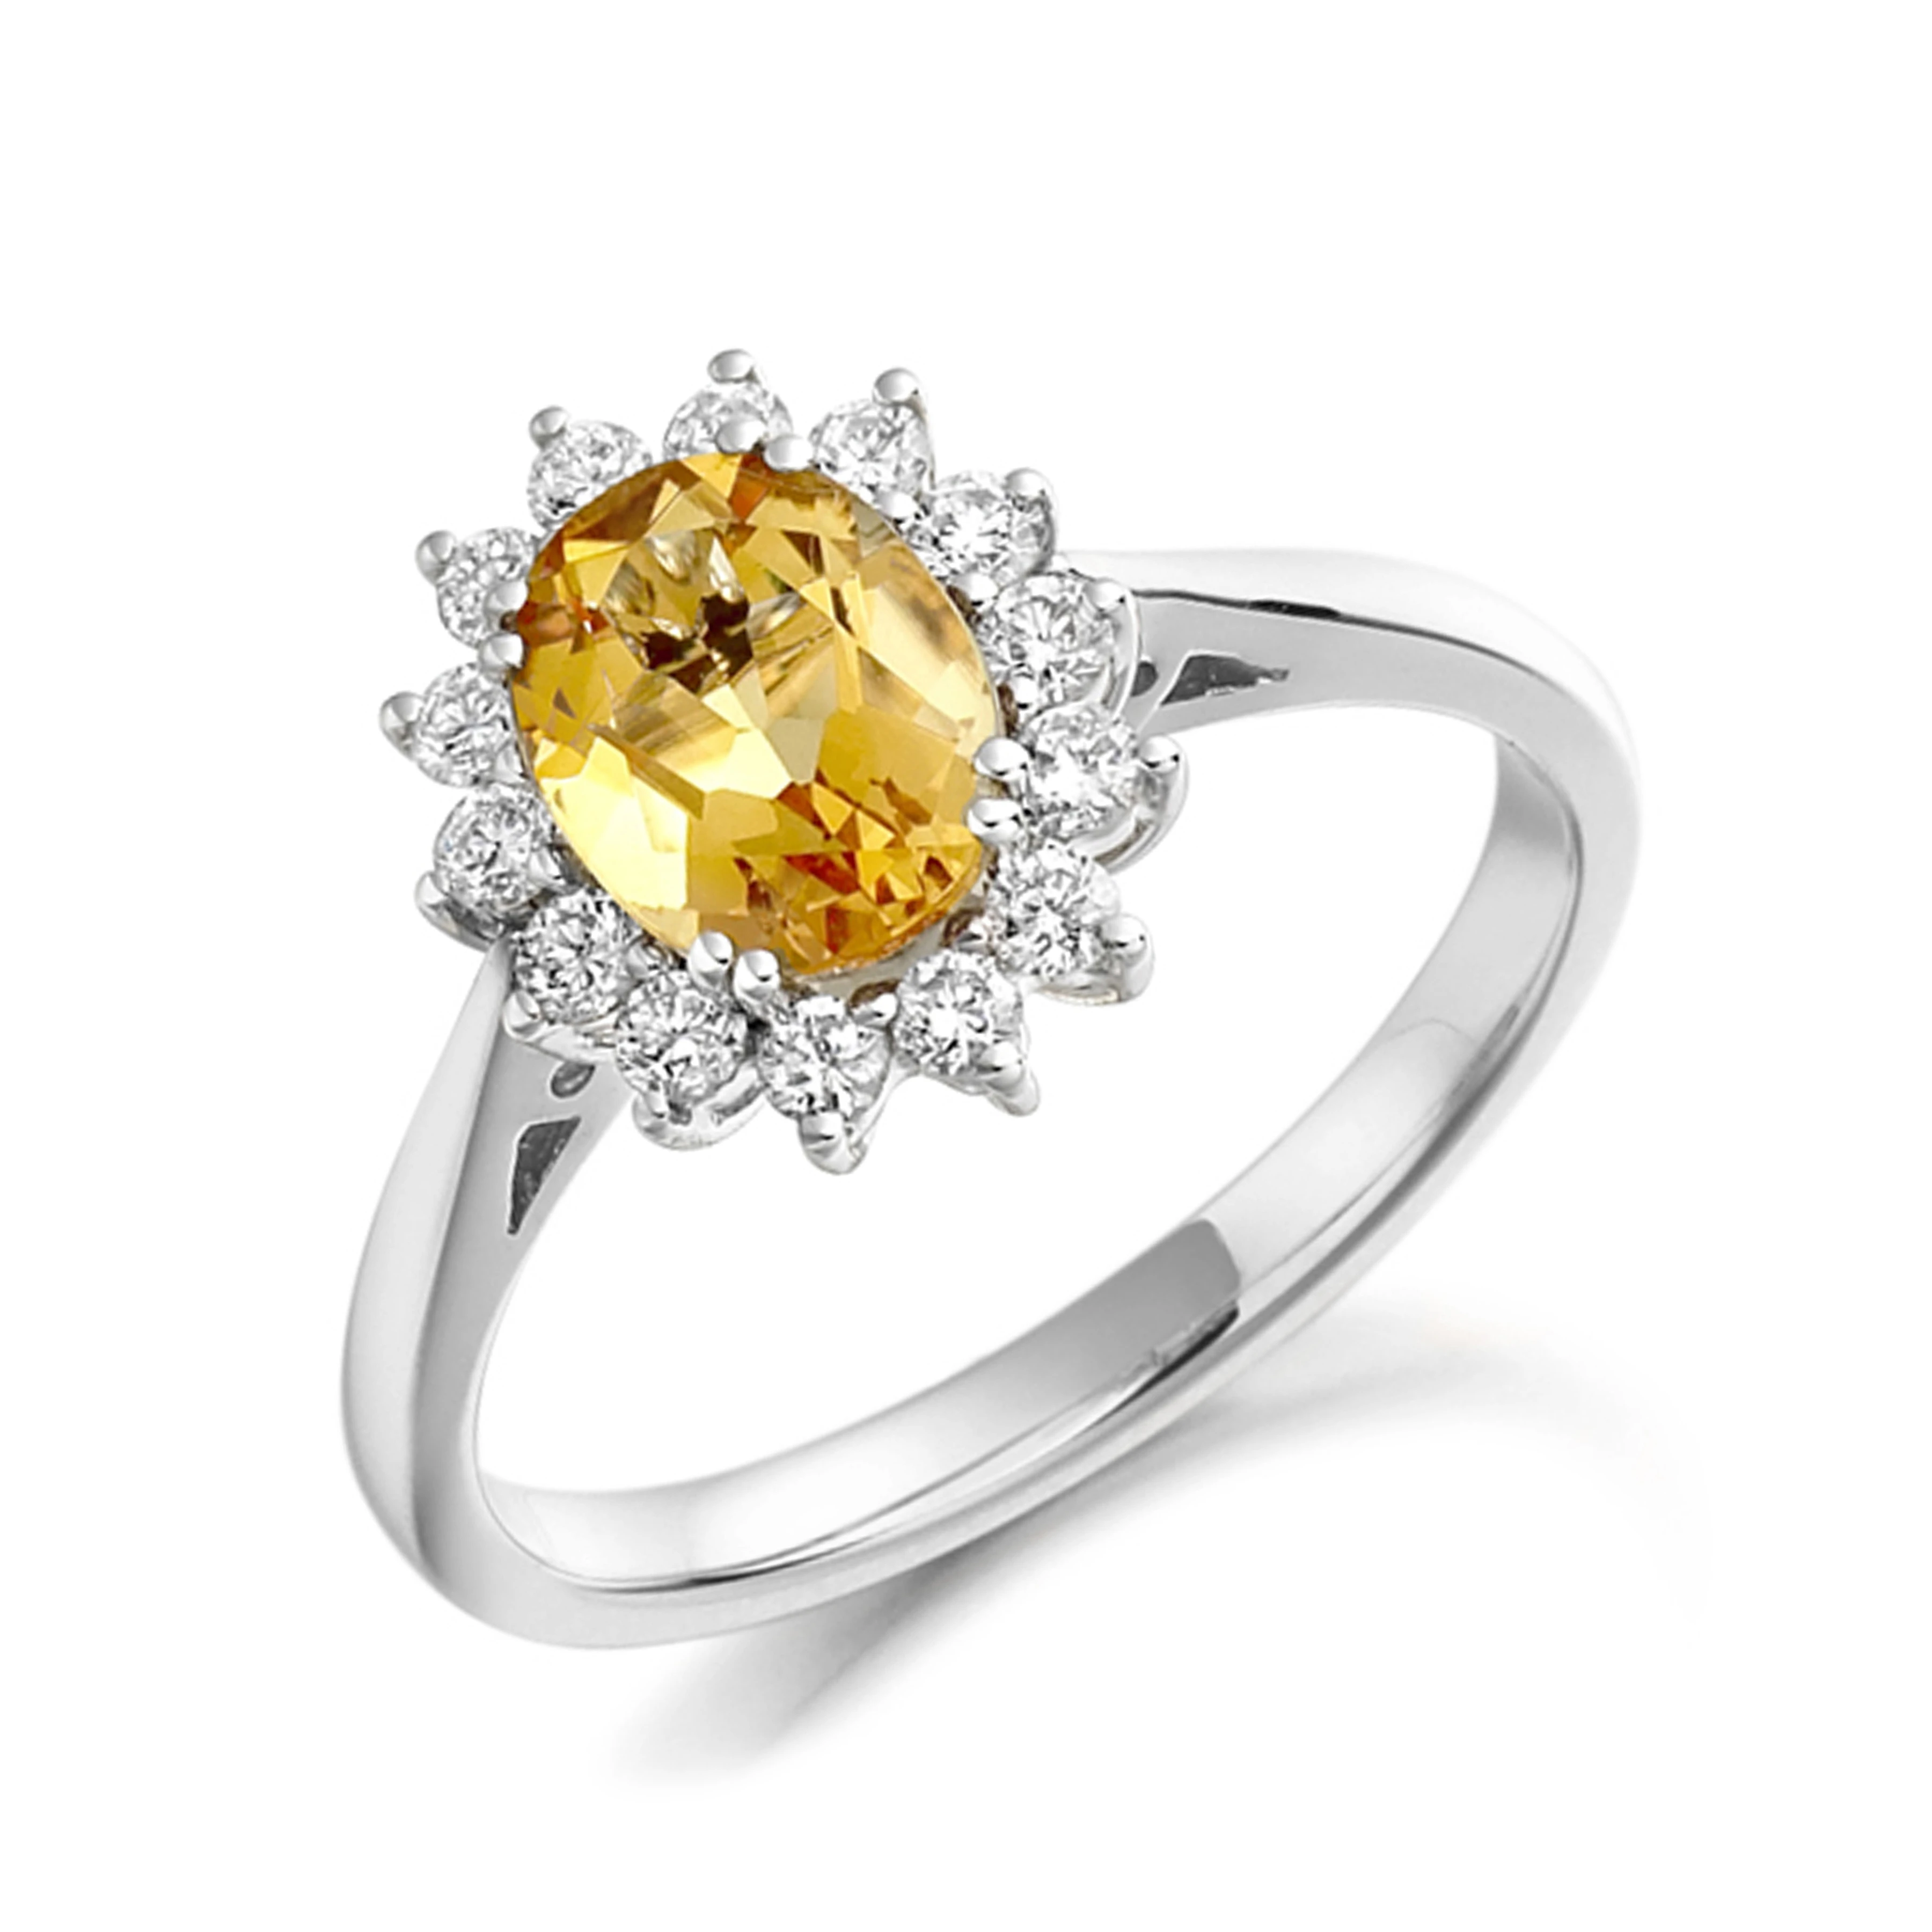 6X4mm Oval Citrine Hand Wired Diamond And Gemstone Ring